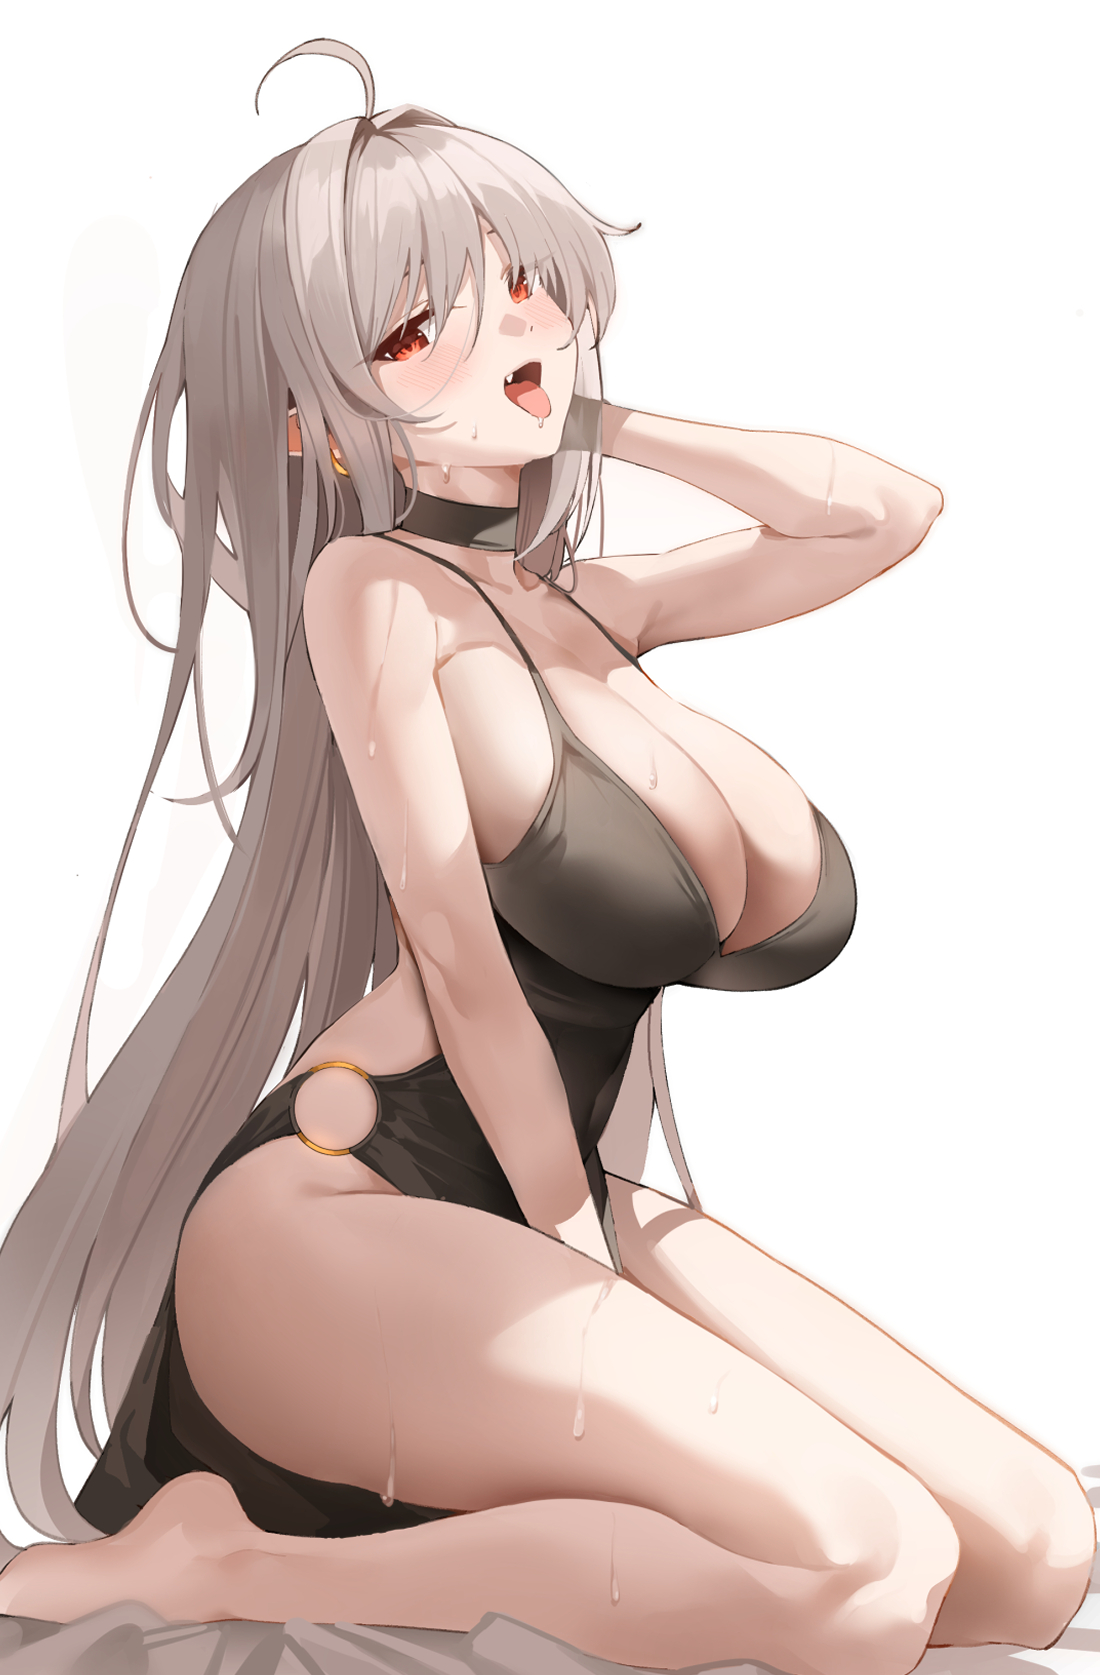 Anime 1100x1675 anime anime girls digital art artwork 2D portrait display cleavage big boobs silver hair red eyes open mouth tongue out blushing looking at viewer pointy ears long hair dress sweat sweaty body huge breasts thighs kneeling one arm up white background no bra low neckline skinny hand(s) between legs bent legs collar hands on head saliva K pring choker